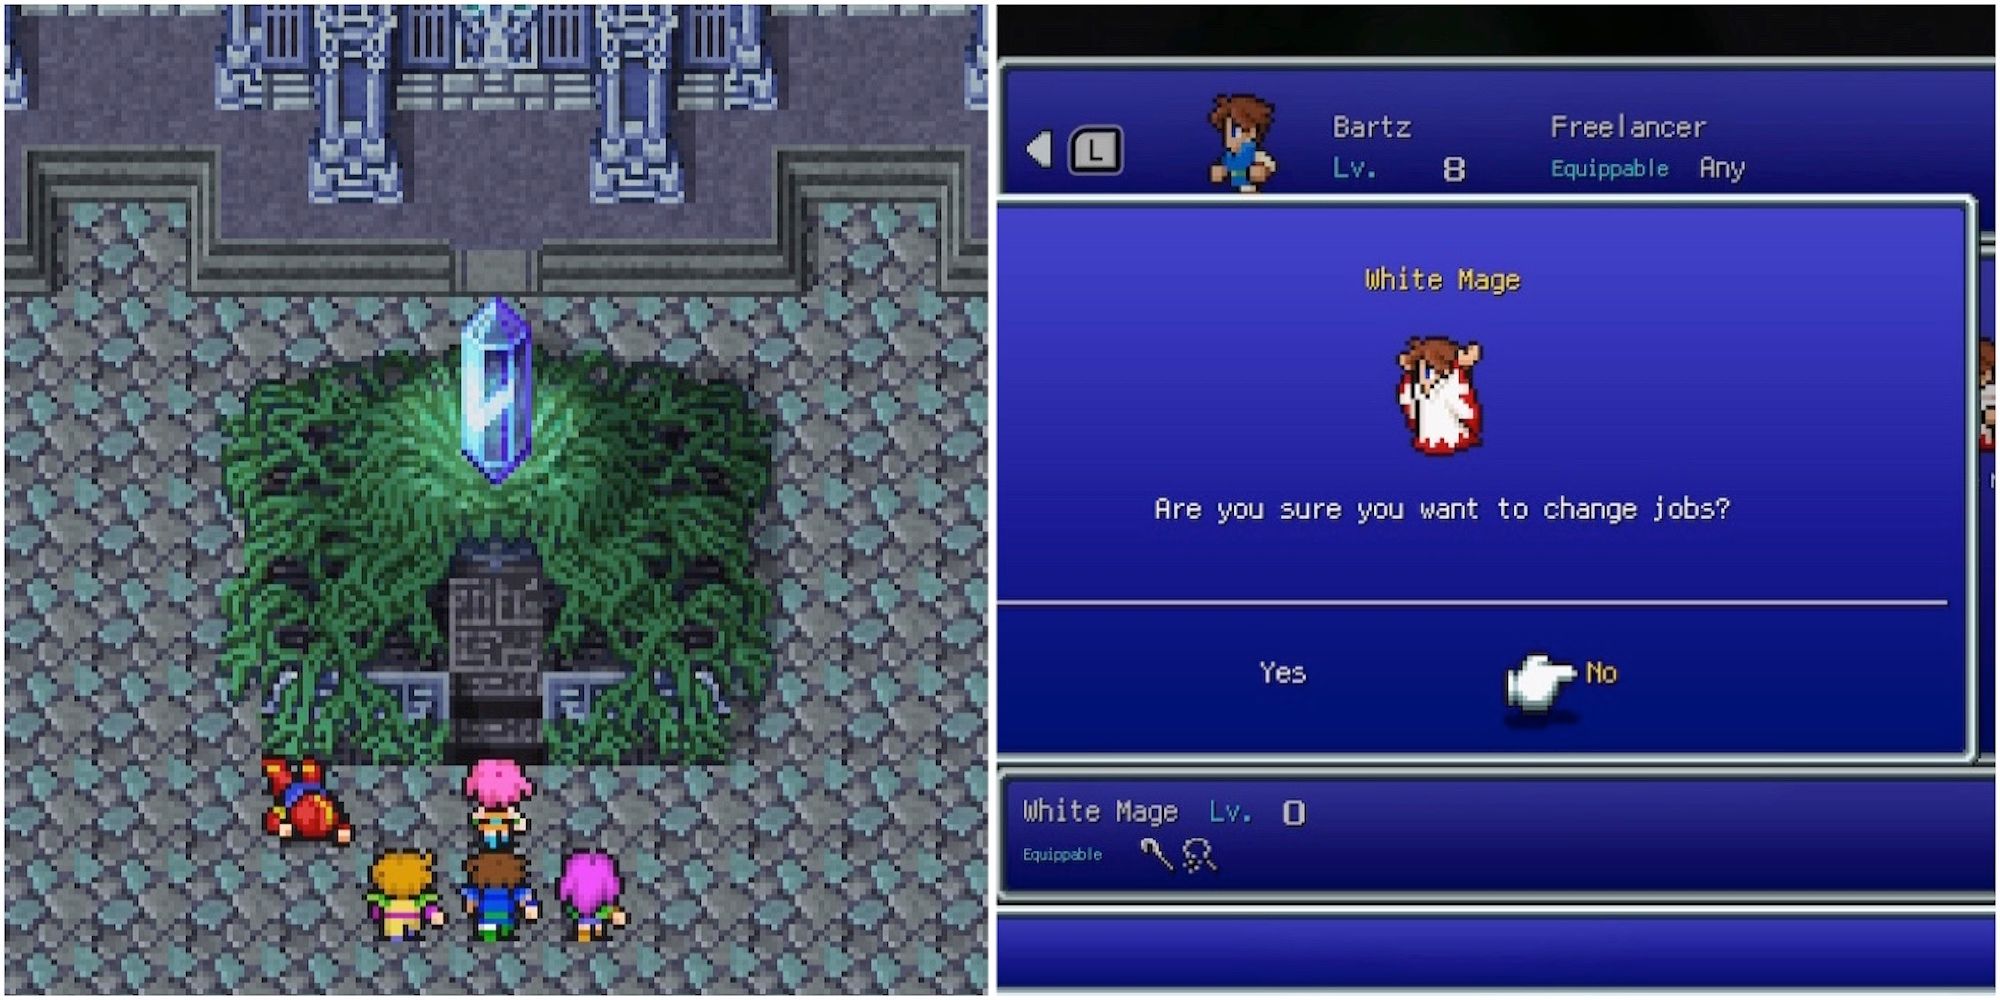 A cutscene featuring characters and Bartz as a White Mage in Final Fantasy 5